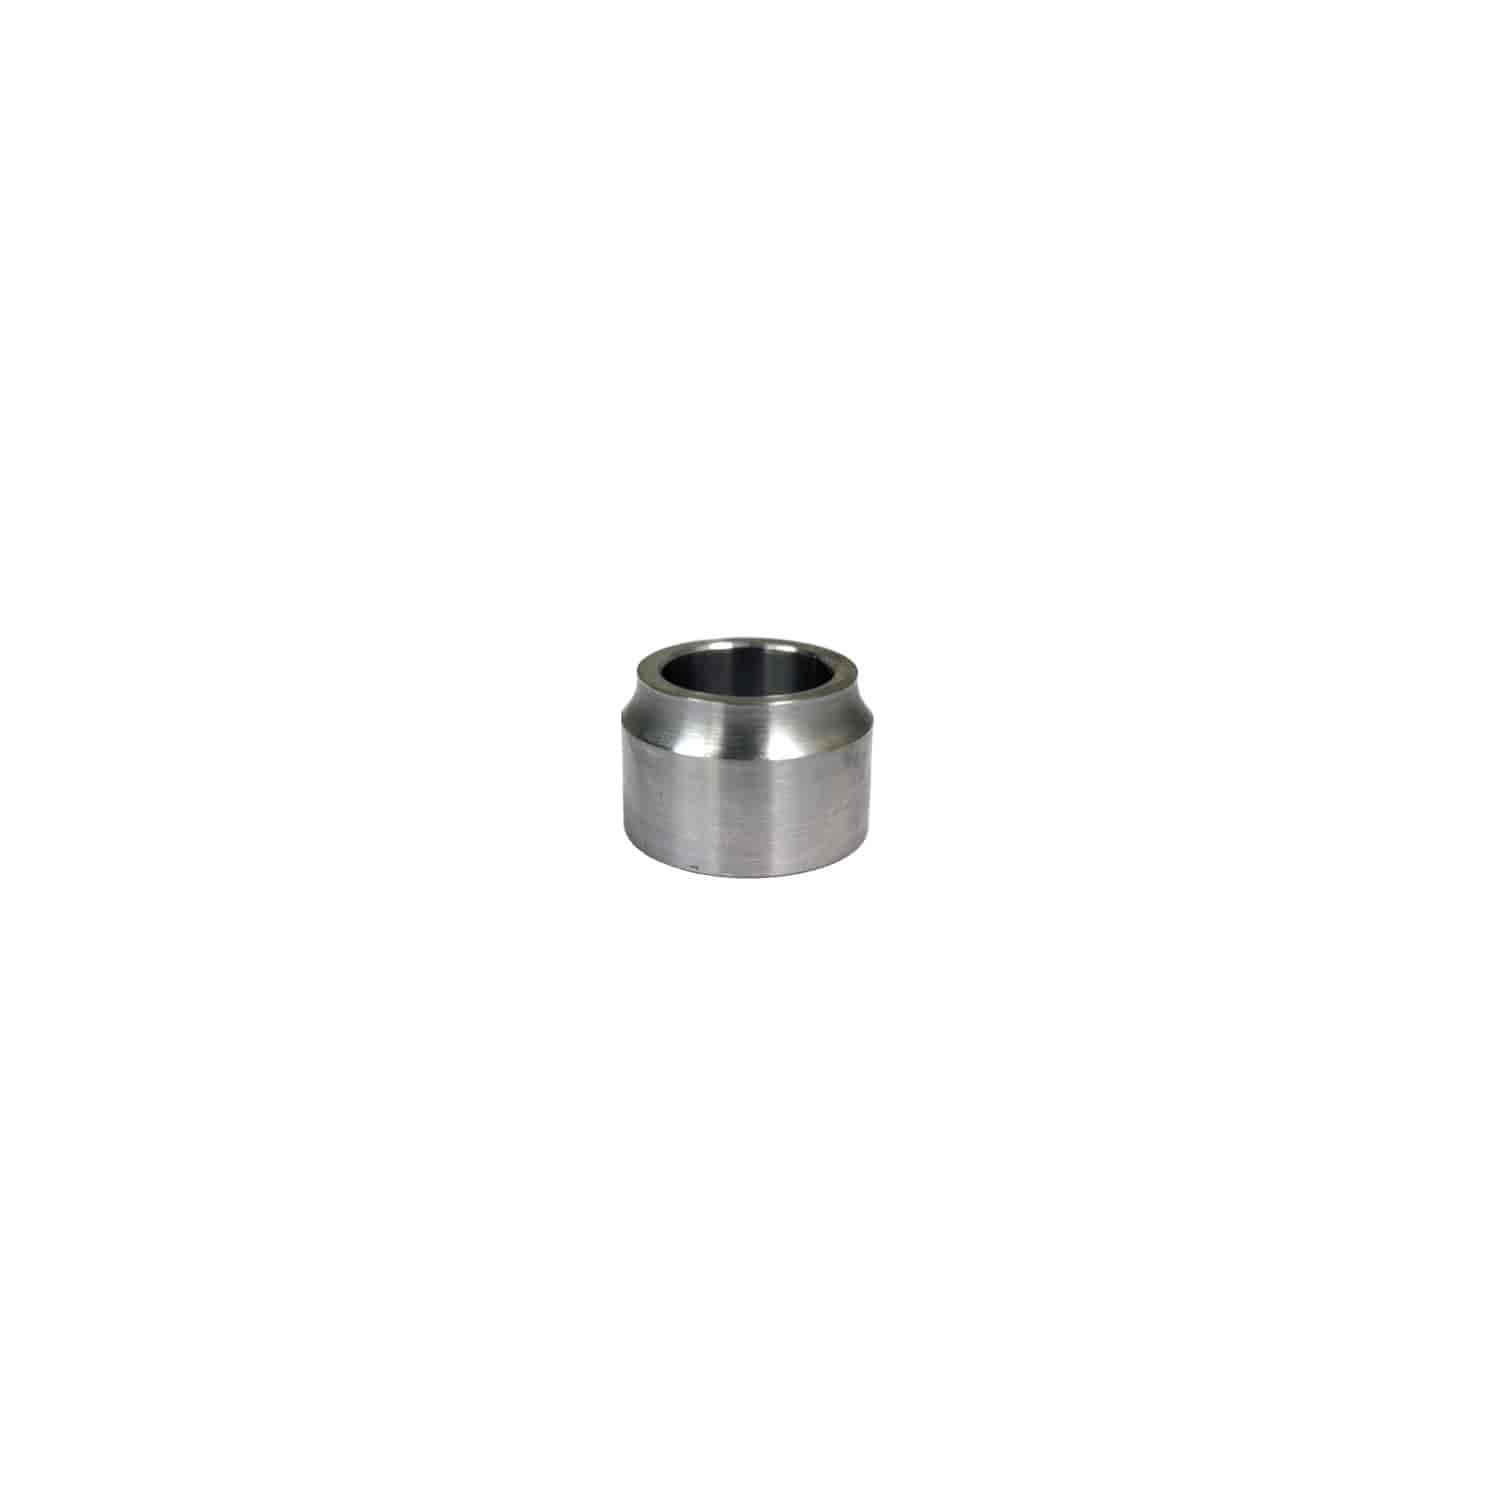 SPACER ROD END SS 1/2 X .750 LG